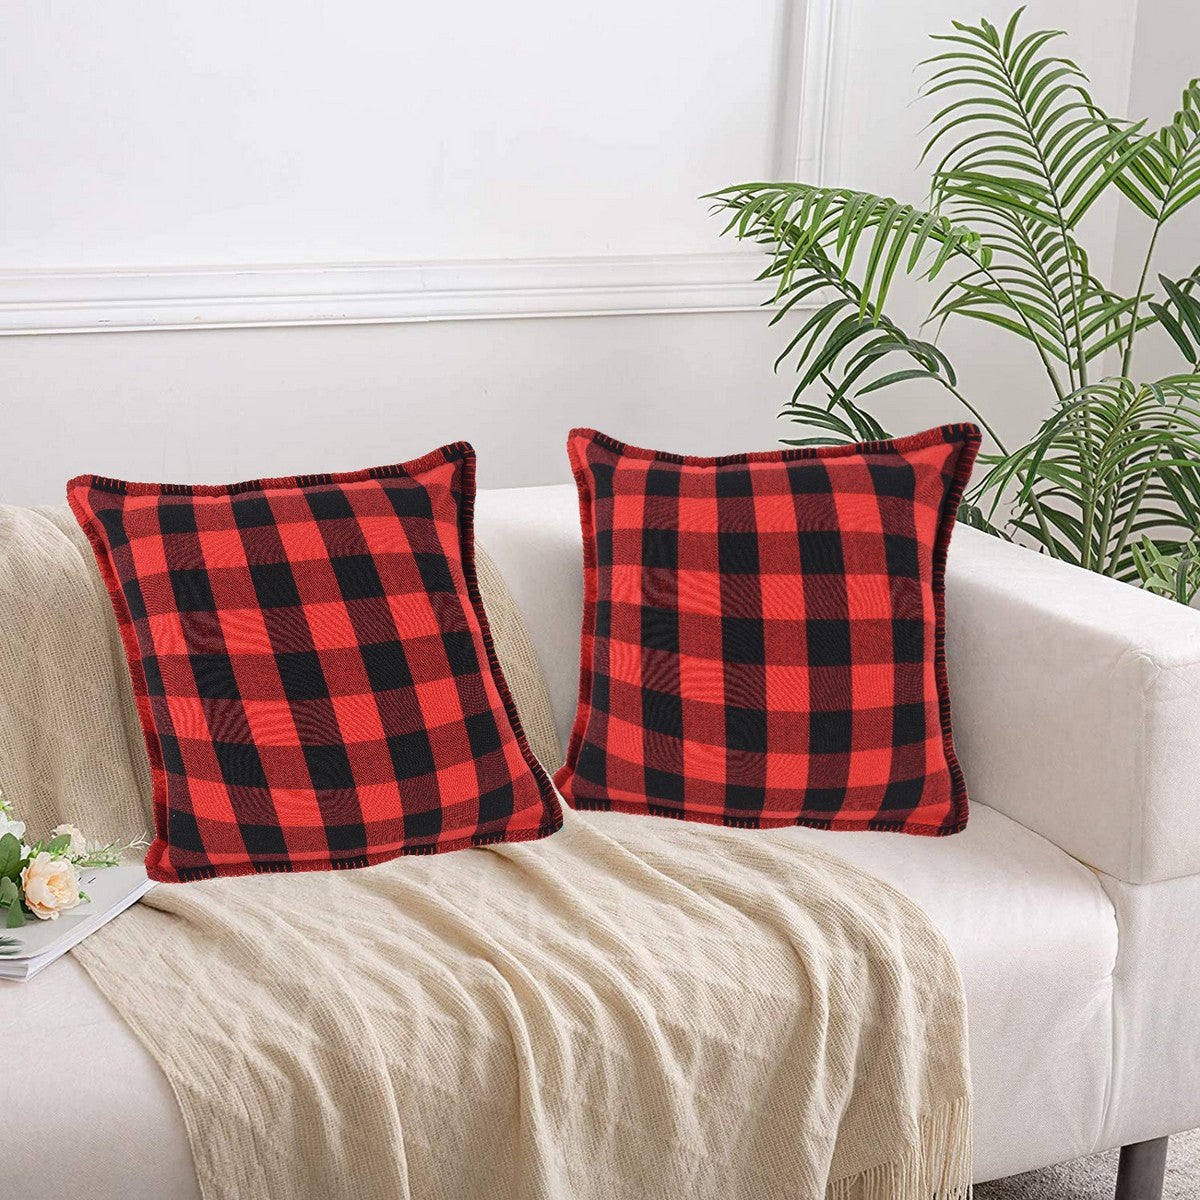 Lushomes Square Cushion Cover with Blanket Stitch, Cotton Sofa Pillow Cover Set of 2, 18x18 Inch, Big Checks, Red and Black Checks, Pillow Cushions Covers (Pack of 2, 45x45 Cms)